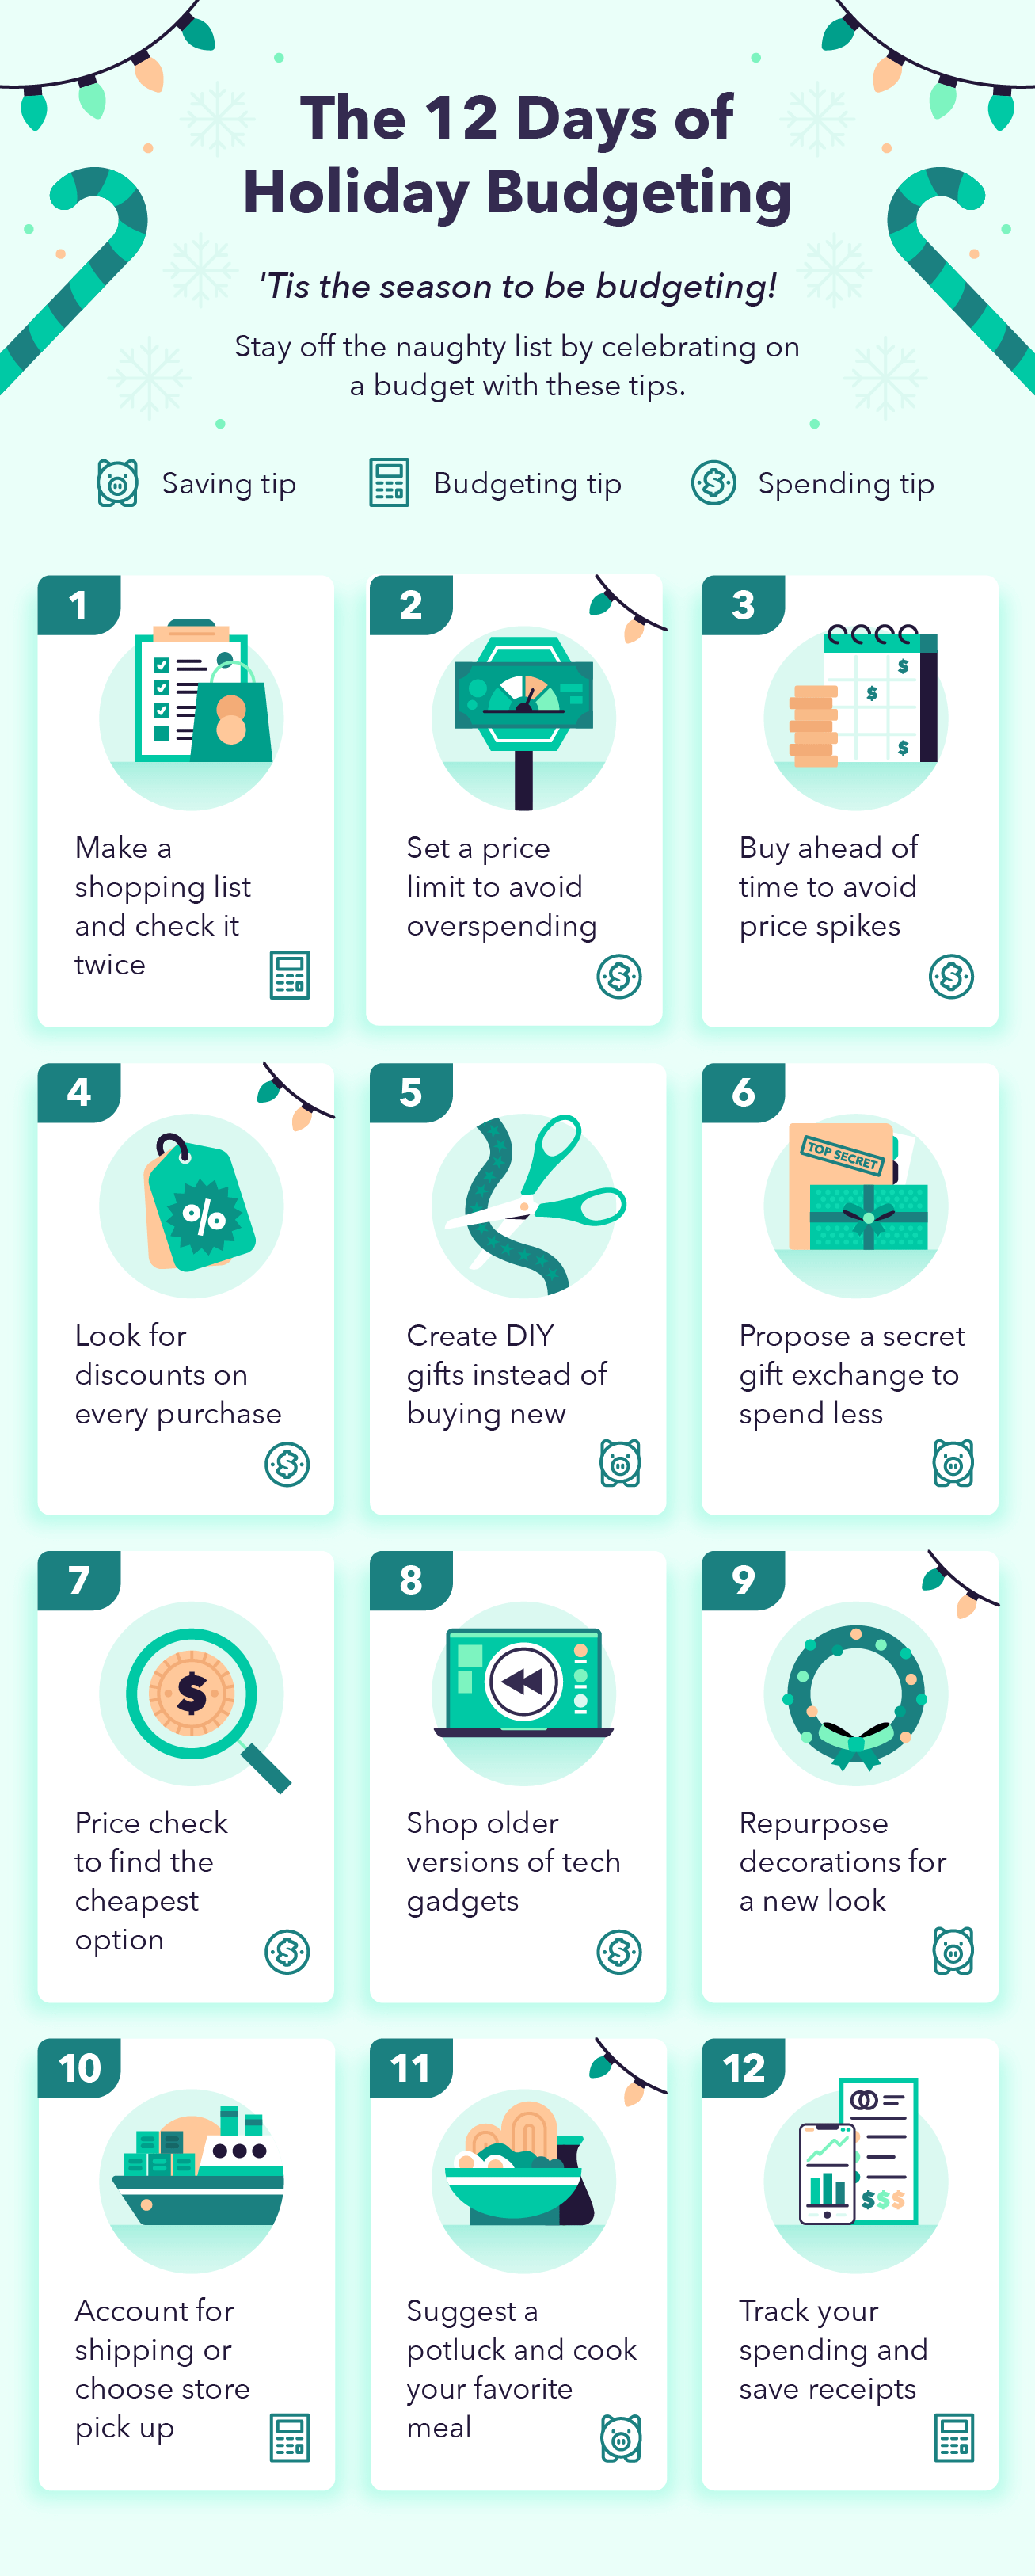 An illustration inspired by an advent calendar contains 12 holiday budgeting tips and whether it is a spending tip, budgeting tip, or saving tip.